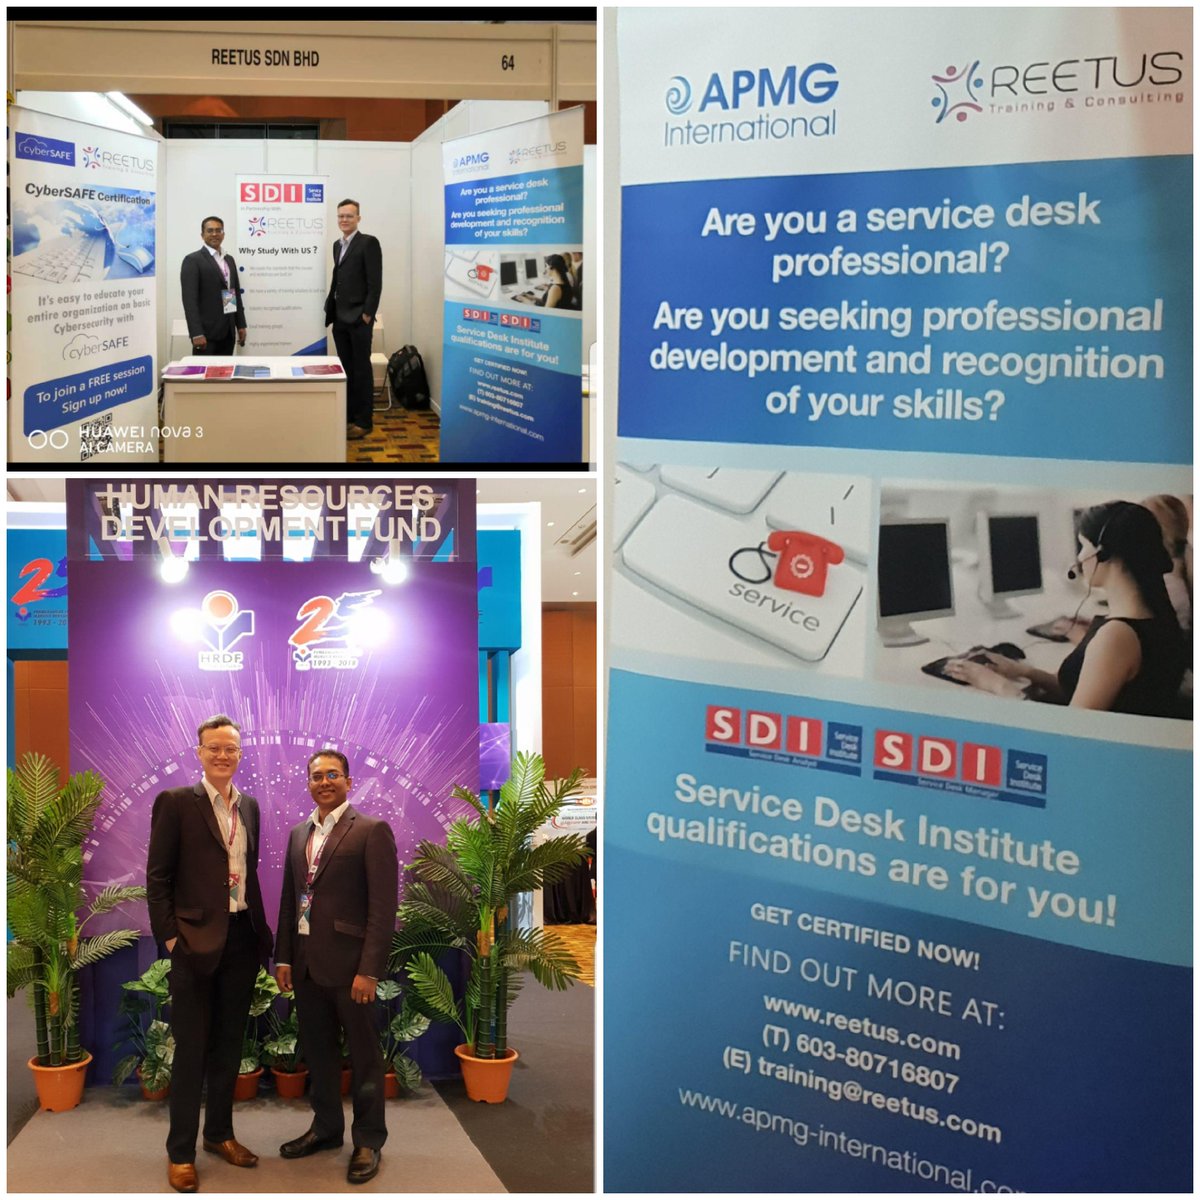 Apmg International On Twitter Our Partners Reetus Are Discussing